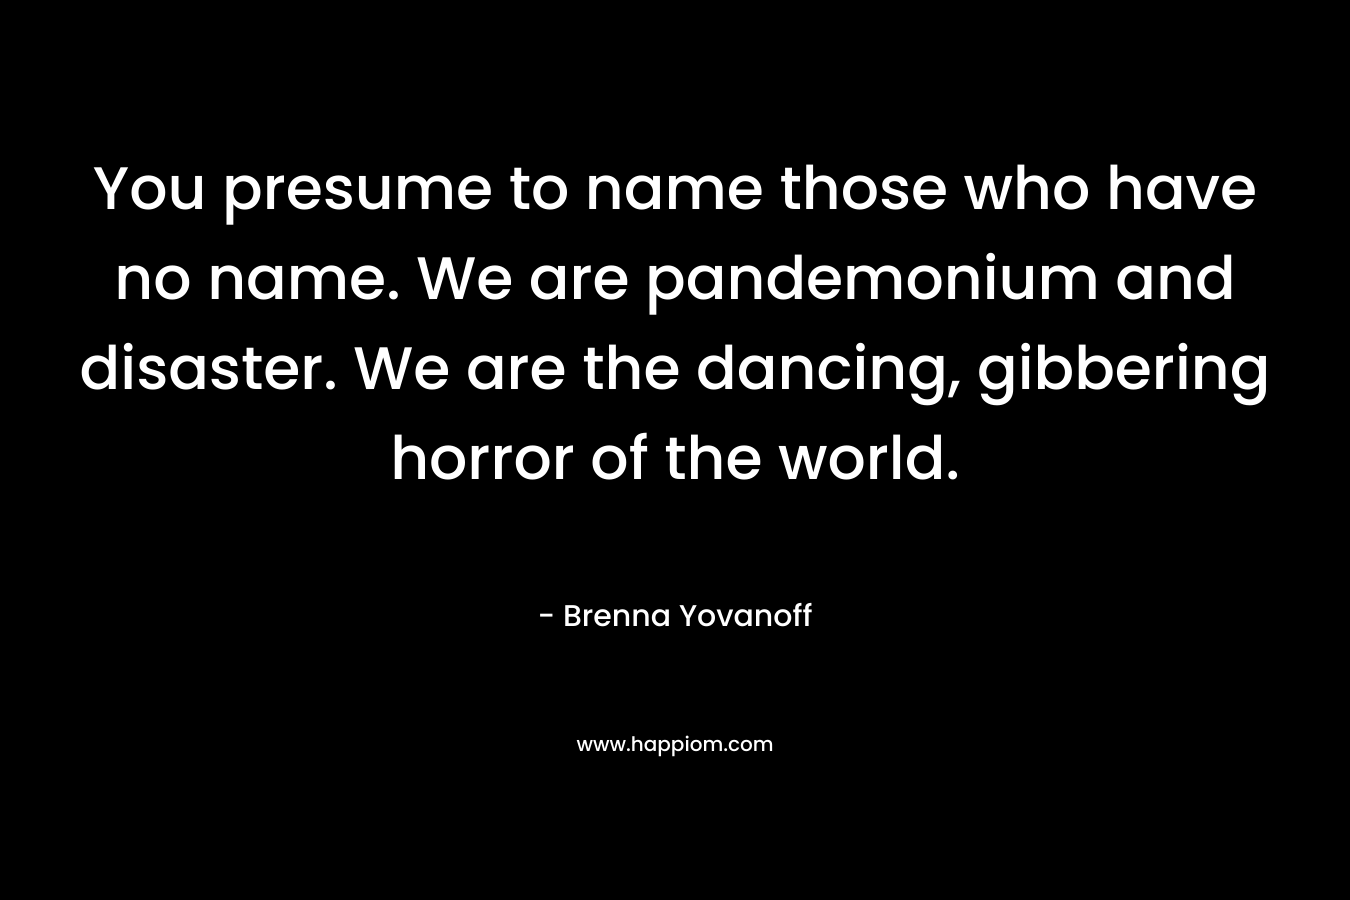 You presume to name those who have no name. We are pandemonium and disaster. We are the dancing, gibbering horror of the world.